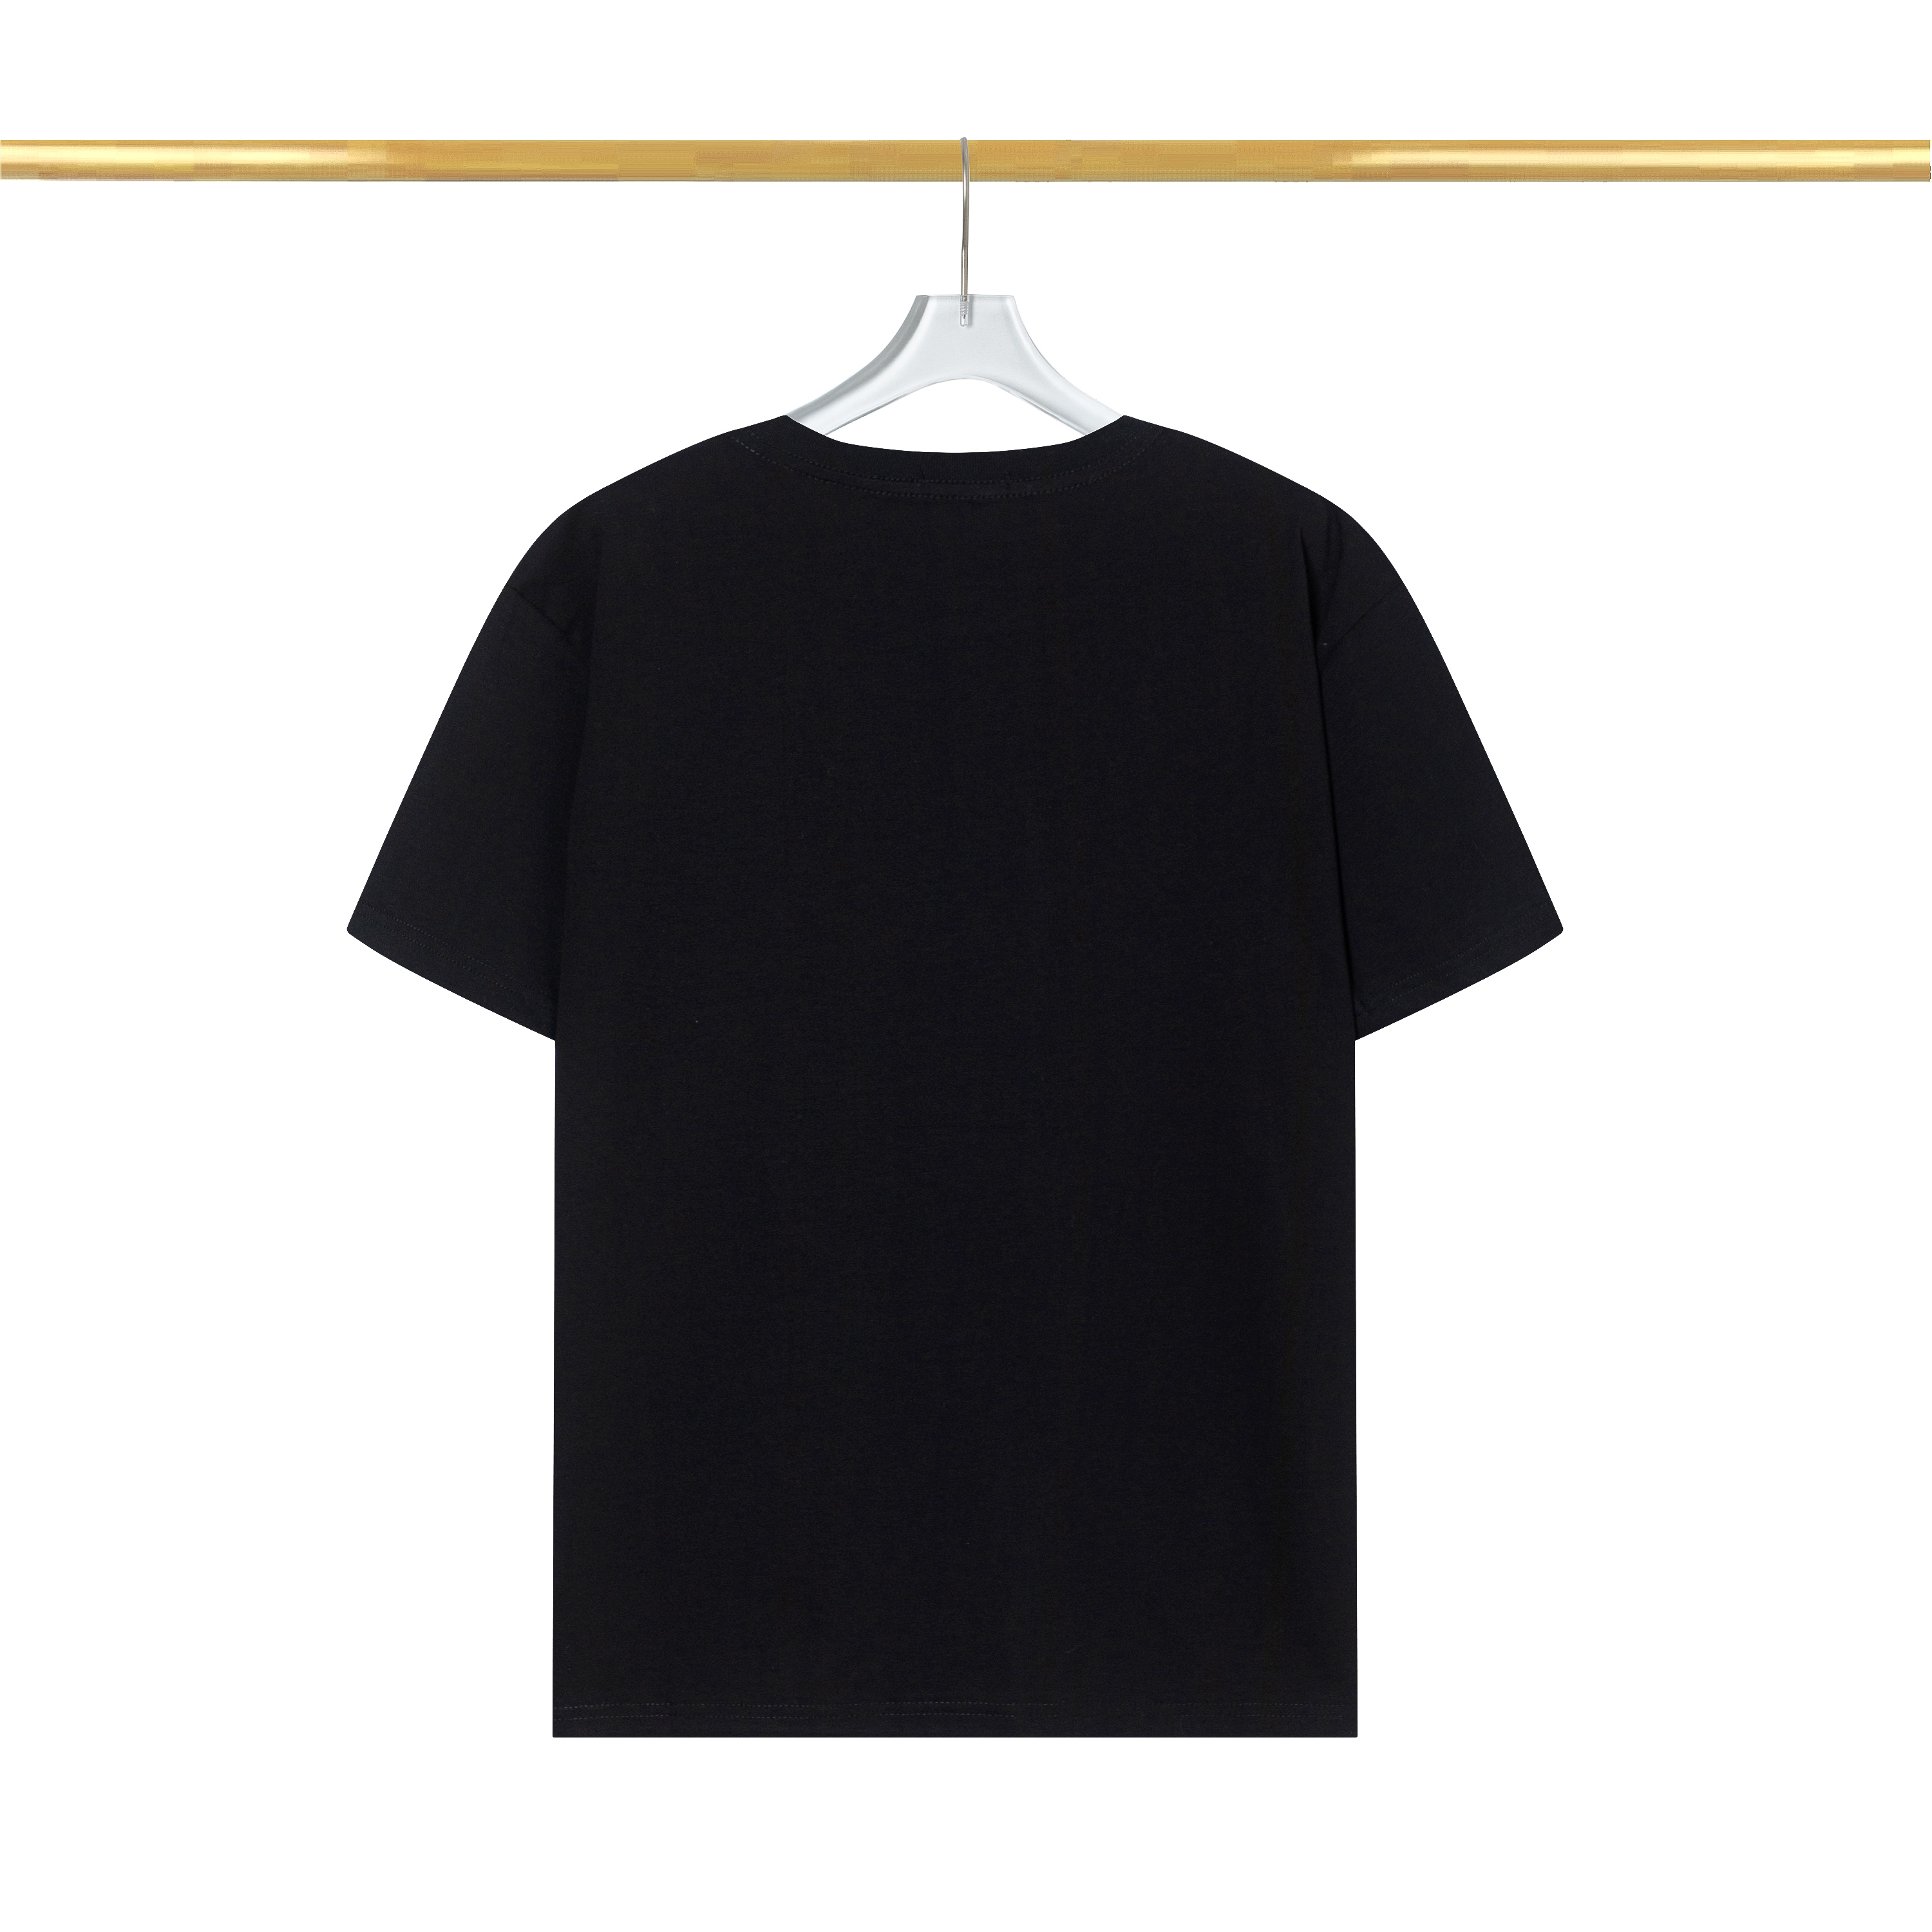 Dior Short Sleeve T Shirts For Men # 272875, cheap Dior T Shirts, only $27!